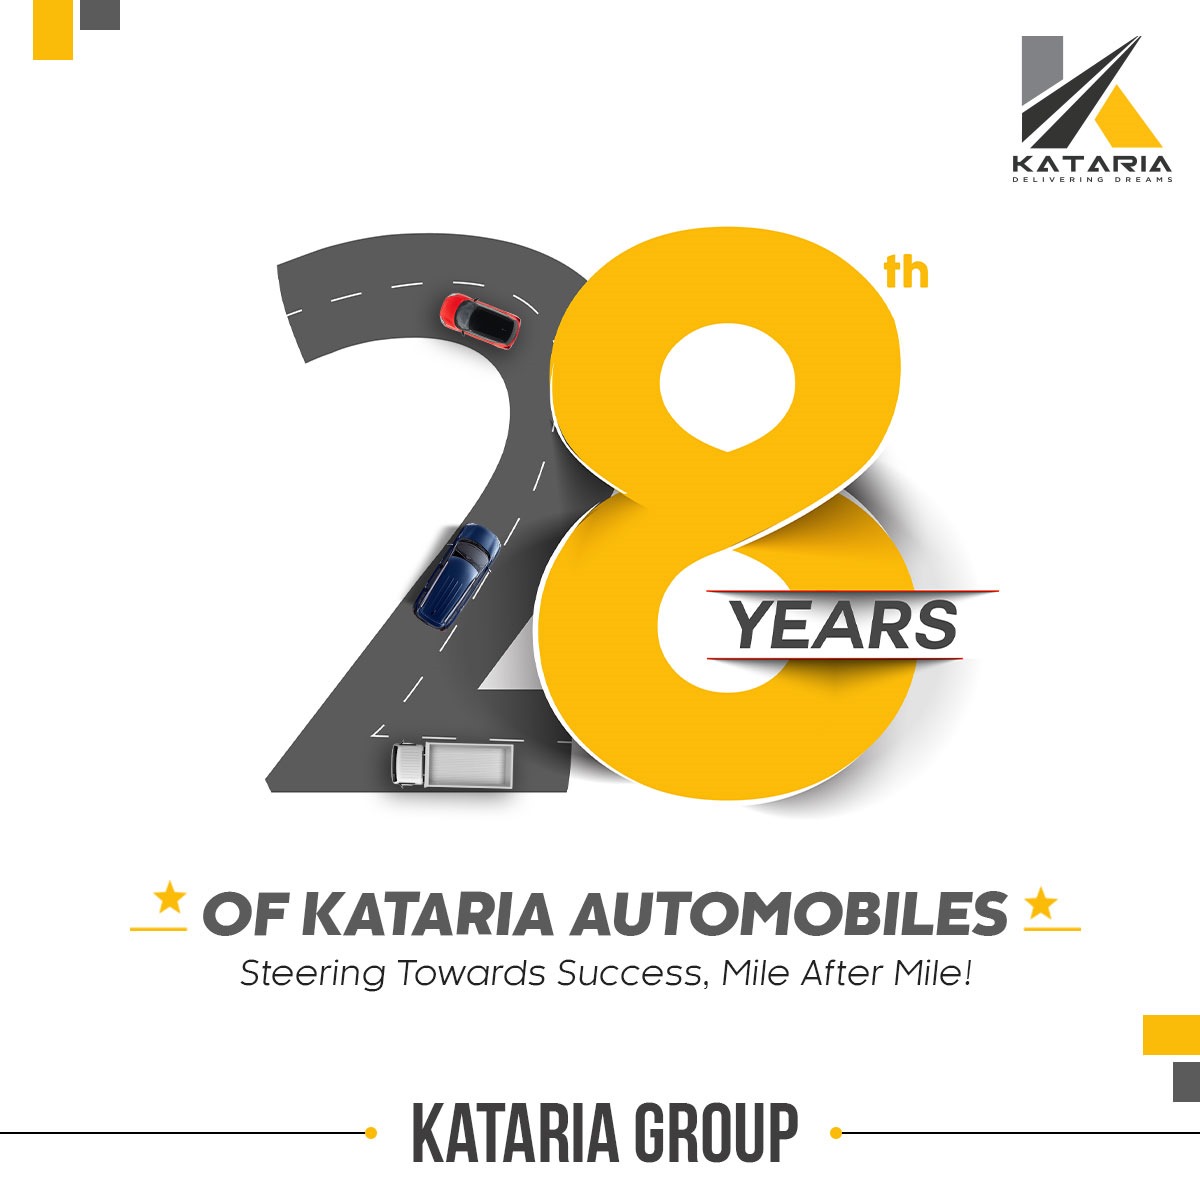 Celebrating 28 years of excellence and innovation at Kataria Automobiles! Thank you to our loyal customers and dedicated team for being part of our incredible journey. Here's to many more years of driving success together!

#KatariaAutomobiles #28Years #AnniversaryCelebration